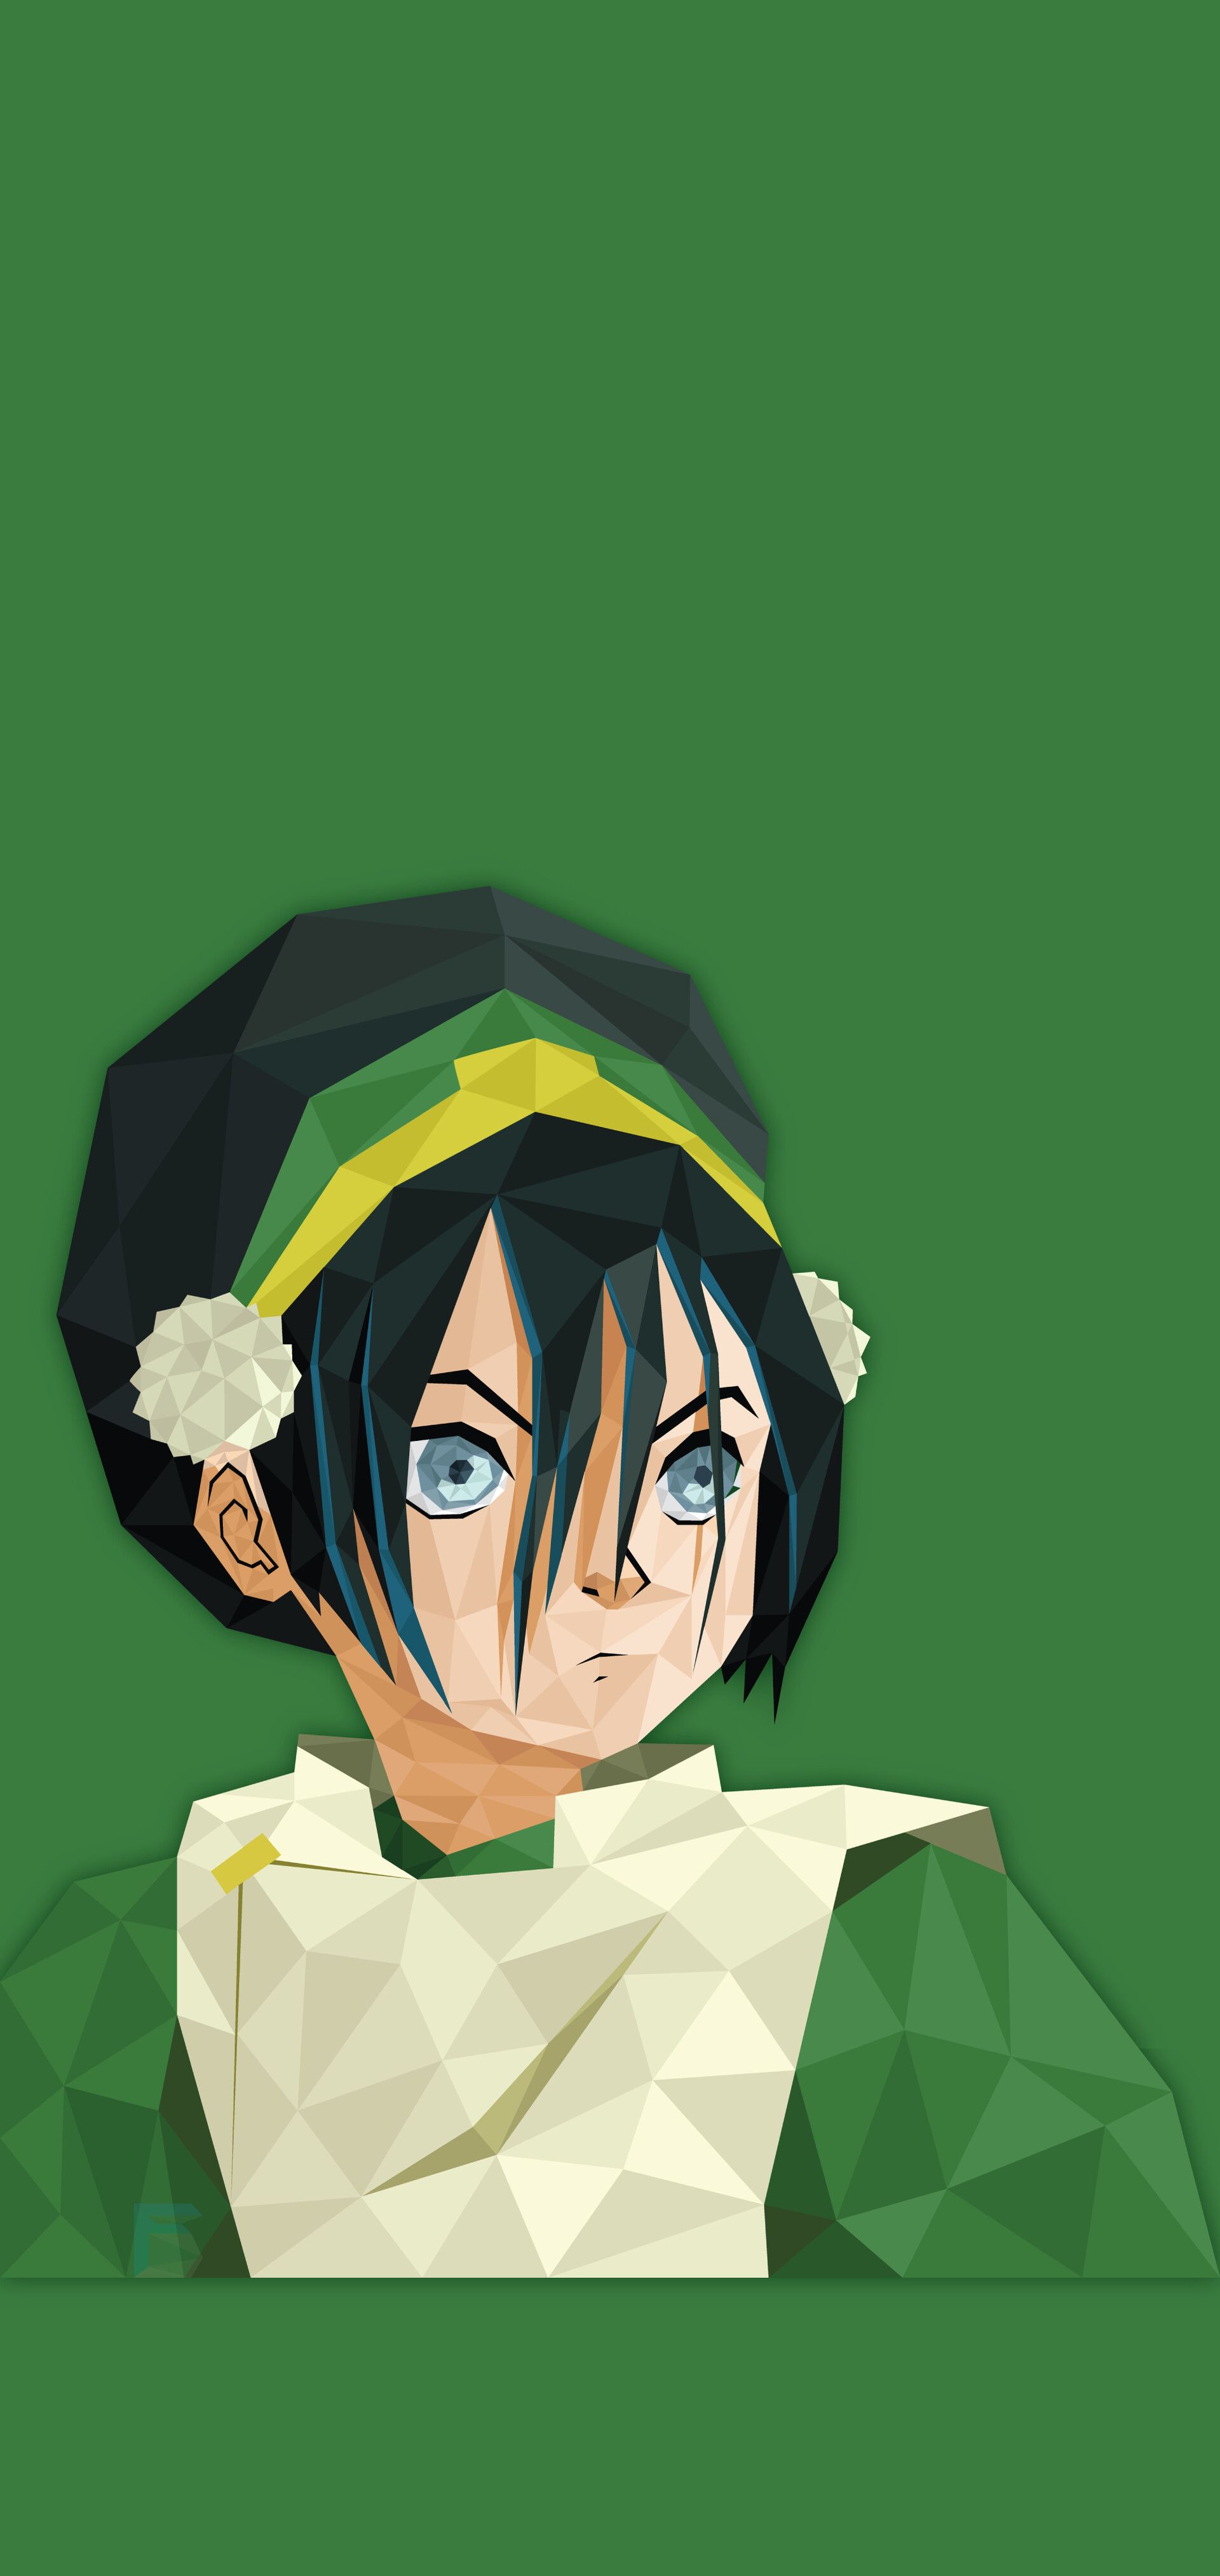 Toph Beifong from Avatar: The Last Airbender. Low poly fan art. 1080x1920 wallpaper. - Low poly